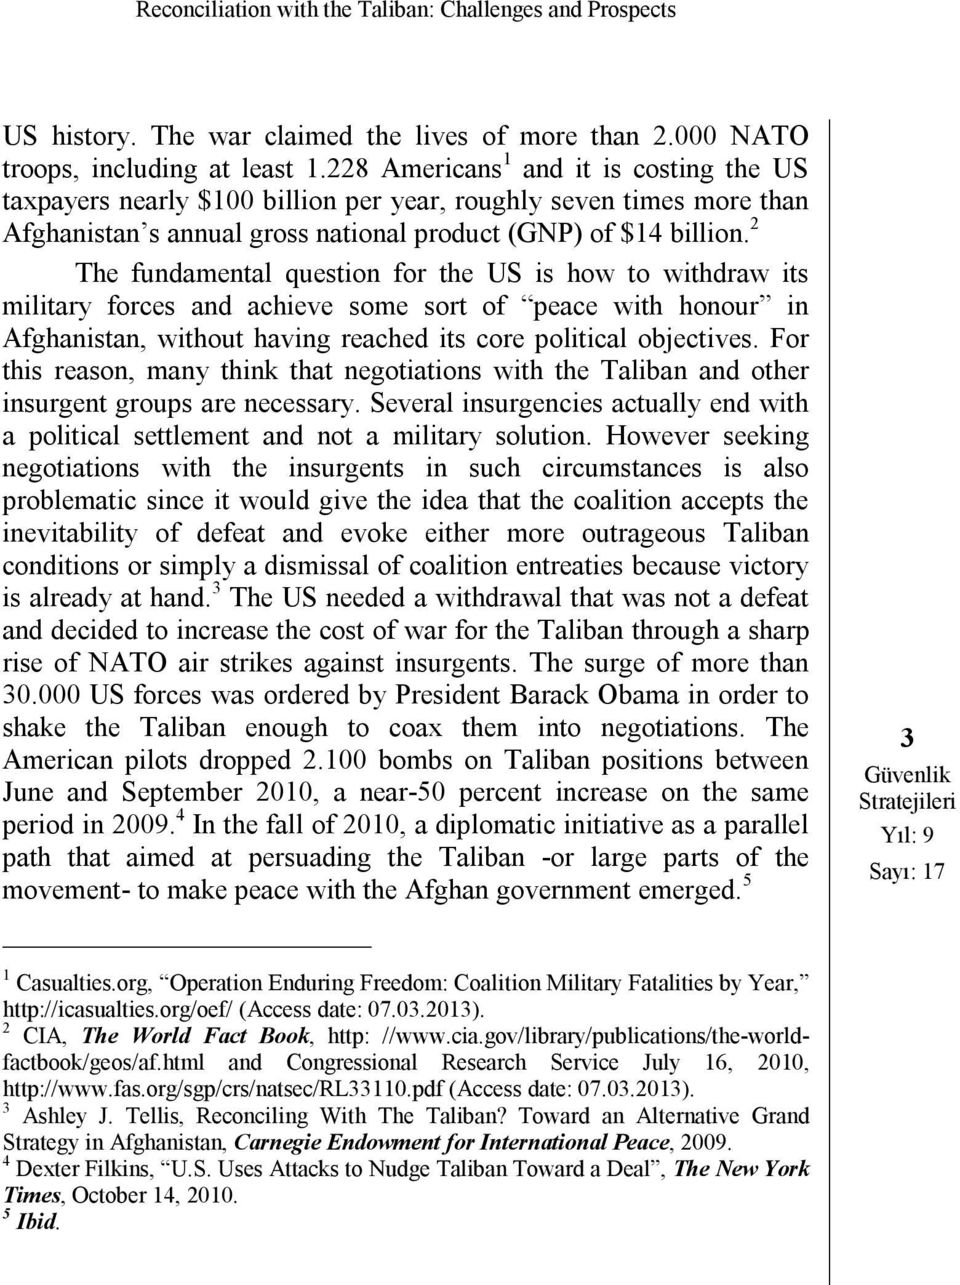 2 The fundamental question for the US is how to withdraw its military forces and achieve some sort of peace with honour in Afghanistan, without having reached its core political objectives.